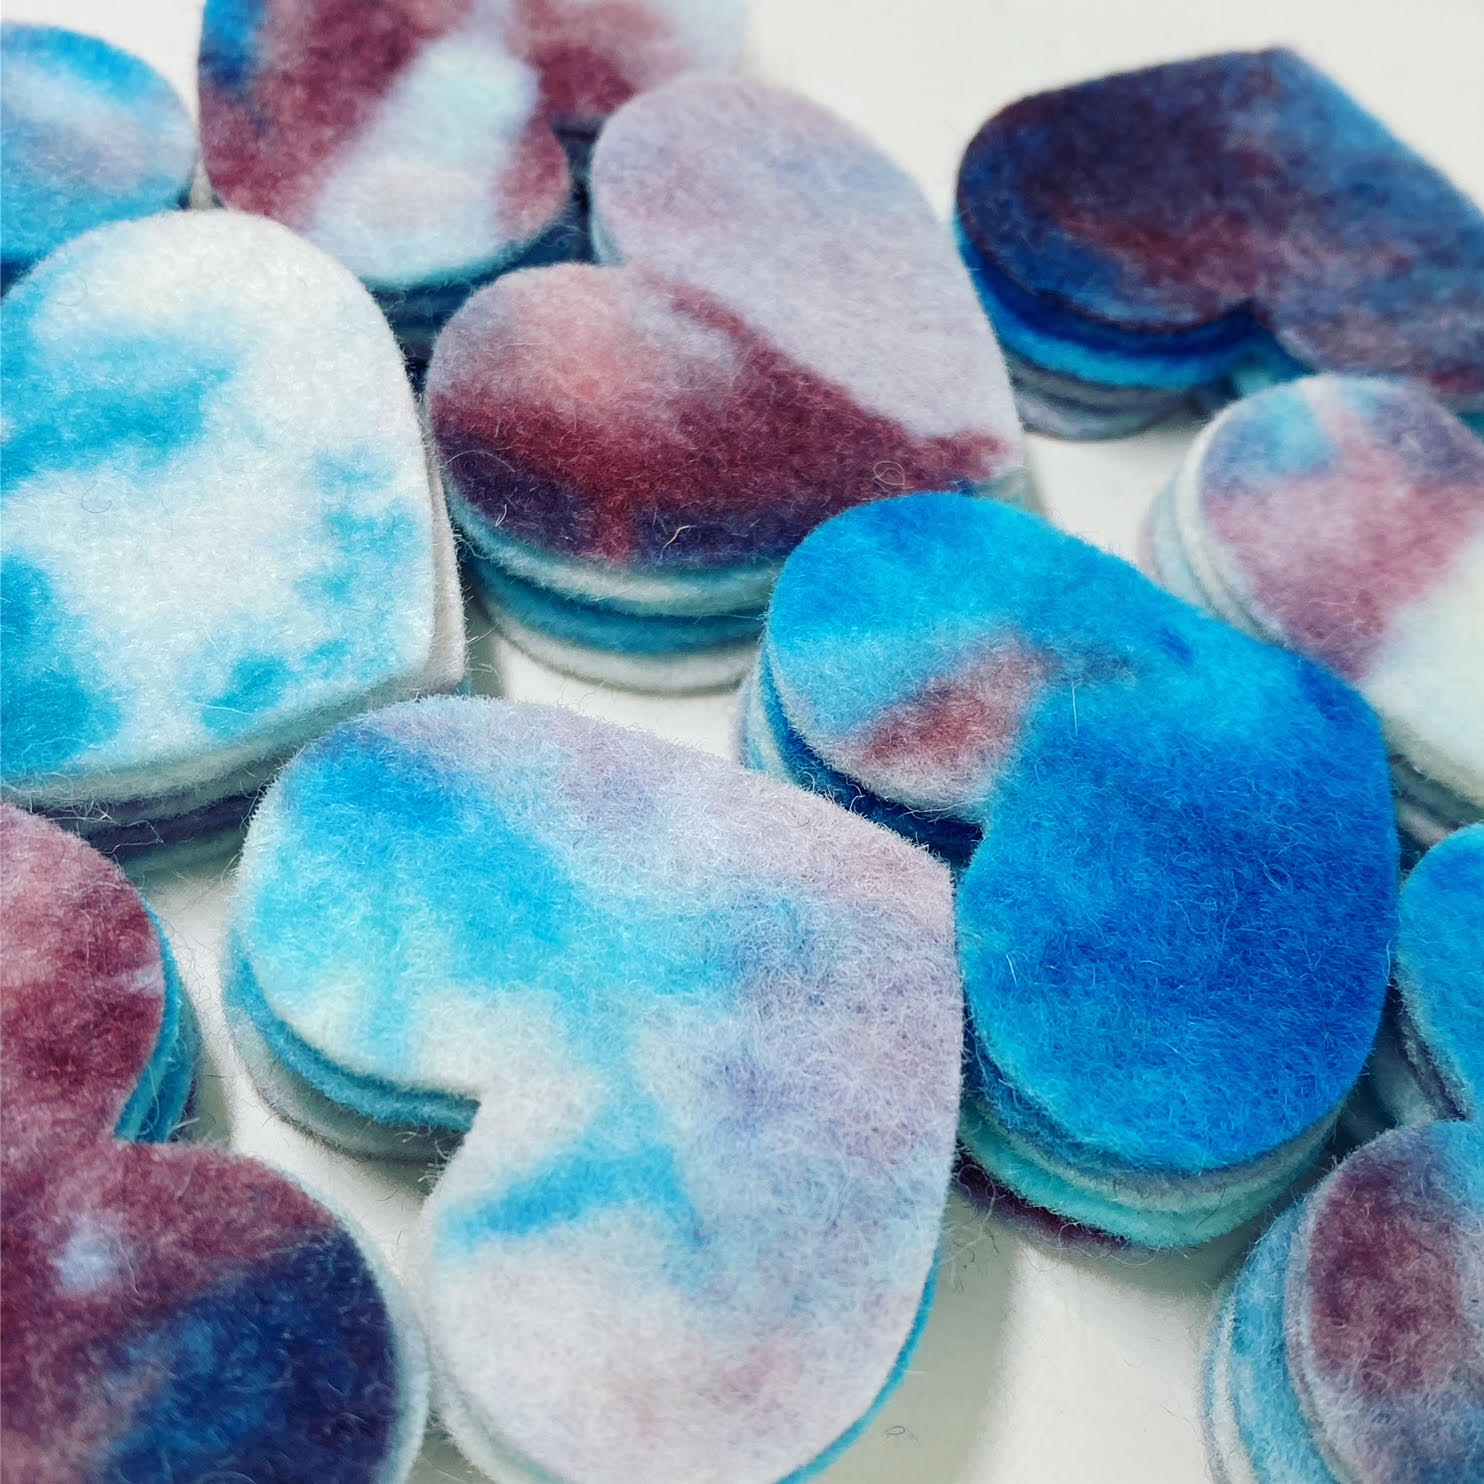 50 Pre-Cut Hearts - HAND-DYED